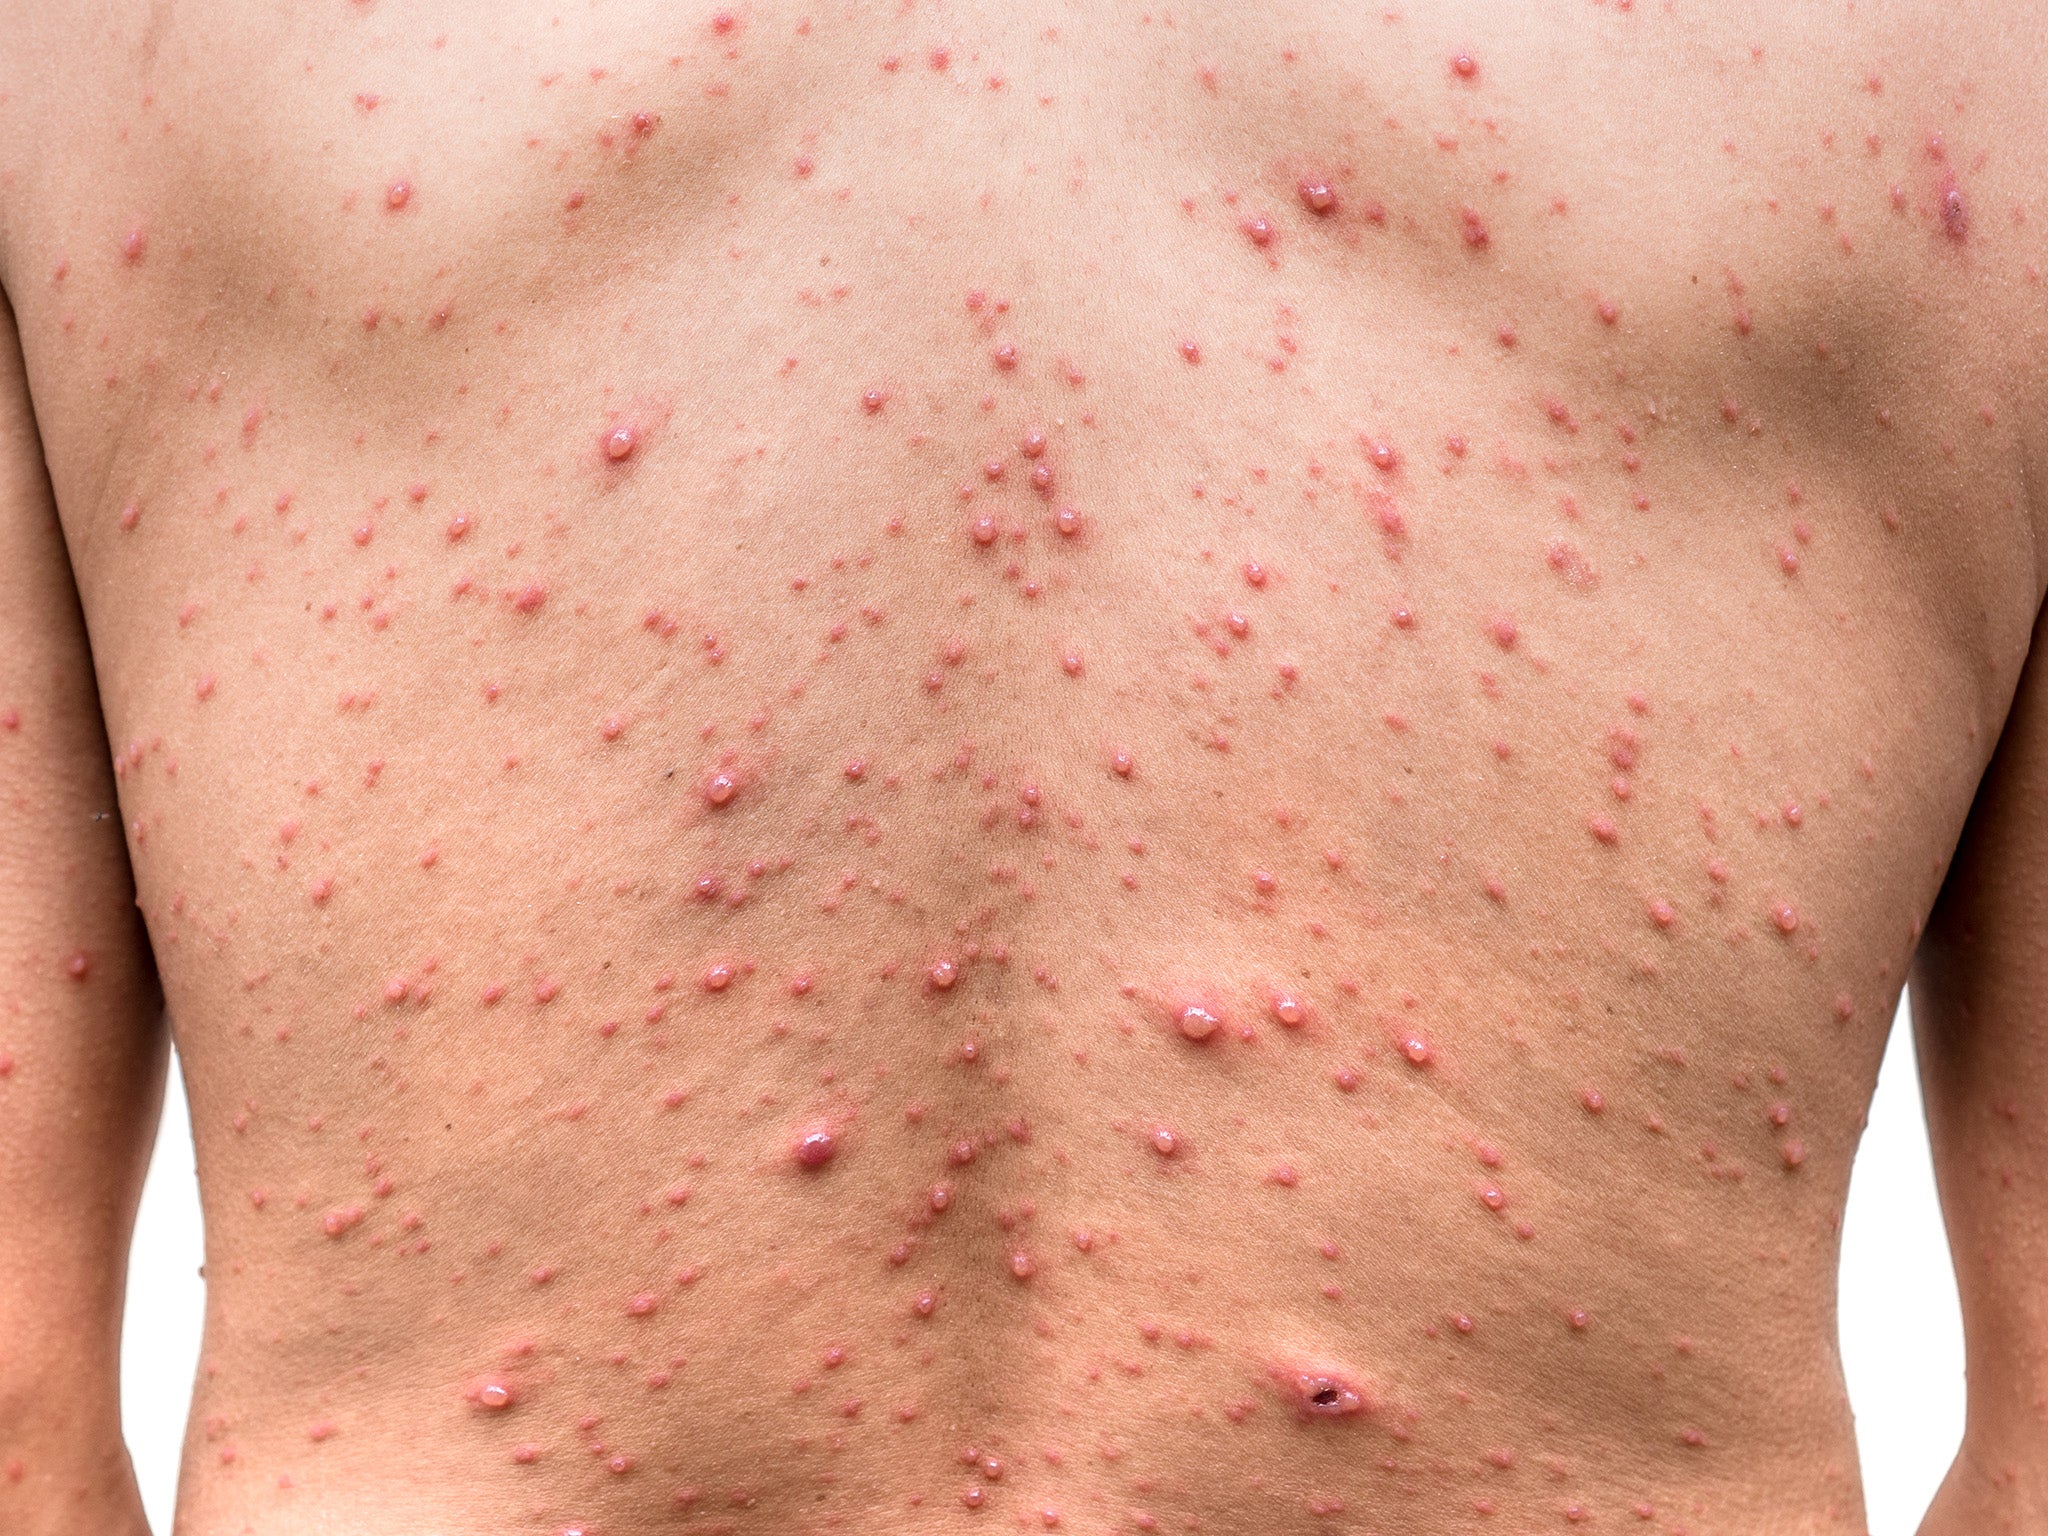 Chickenpox can have serious complications including stroke and pneumonia